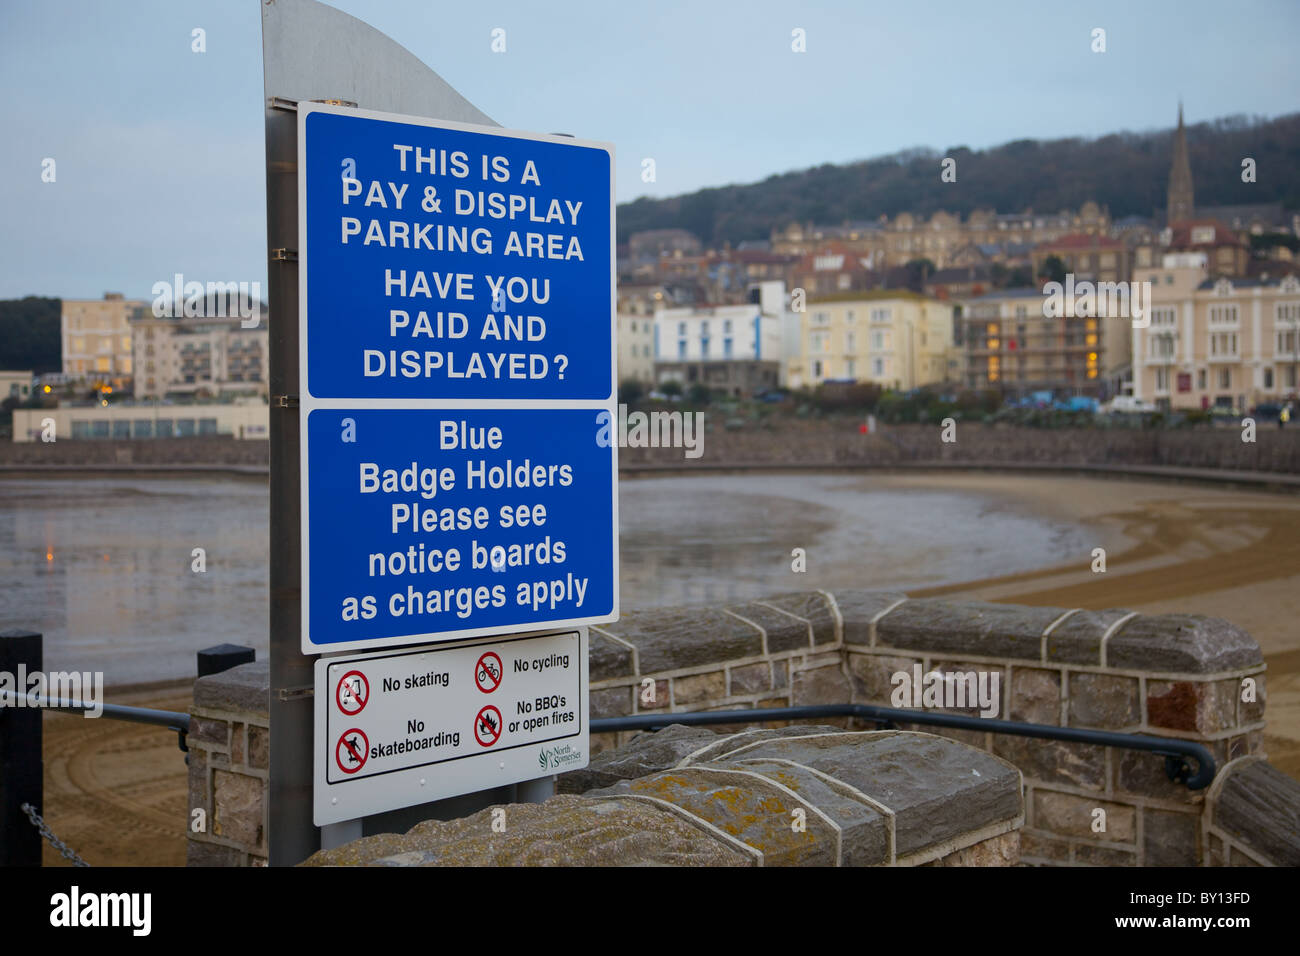 Pay and display parking sign, Weston Super Mare, England Stock Photo